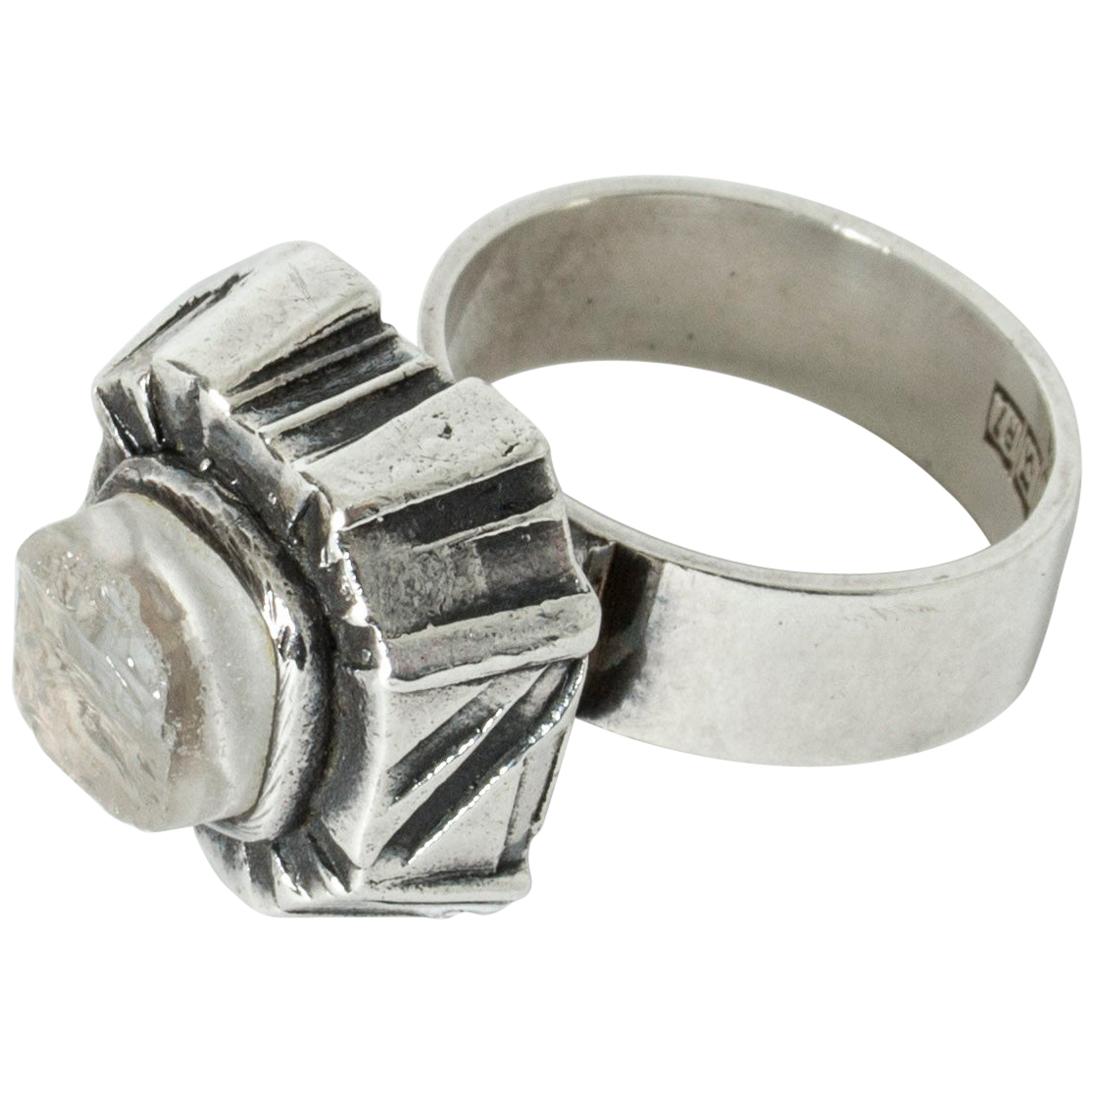 Silver and Rock Crystal Ring by Pentti Sarpaneva for Turun Hopea, Finland, 1970s